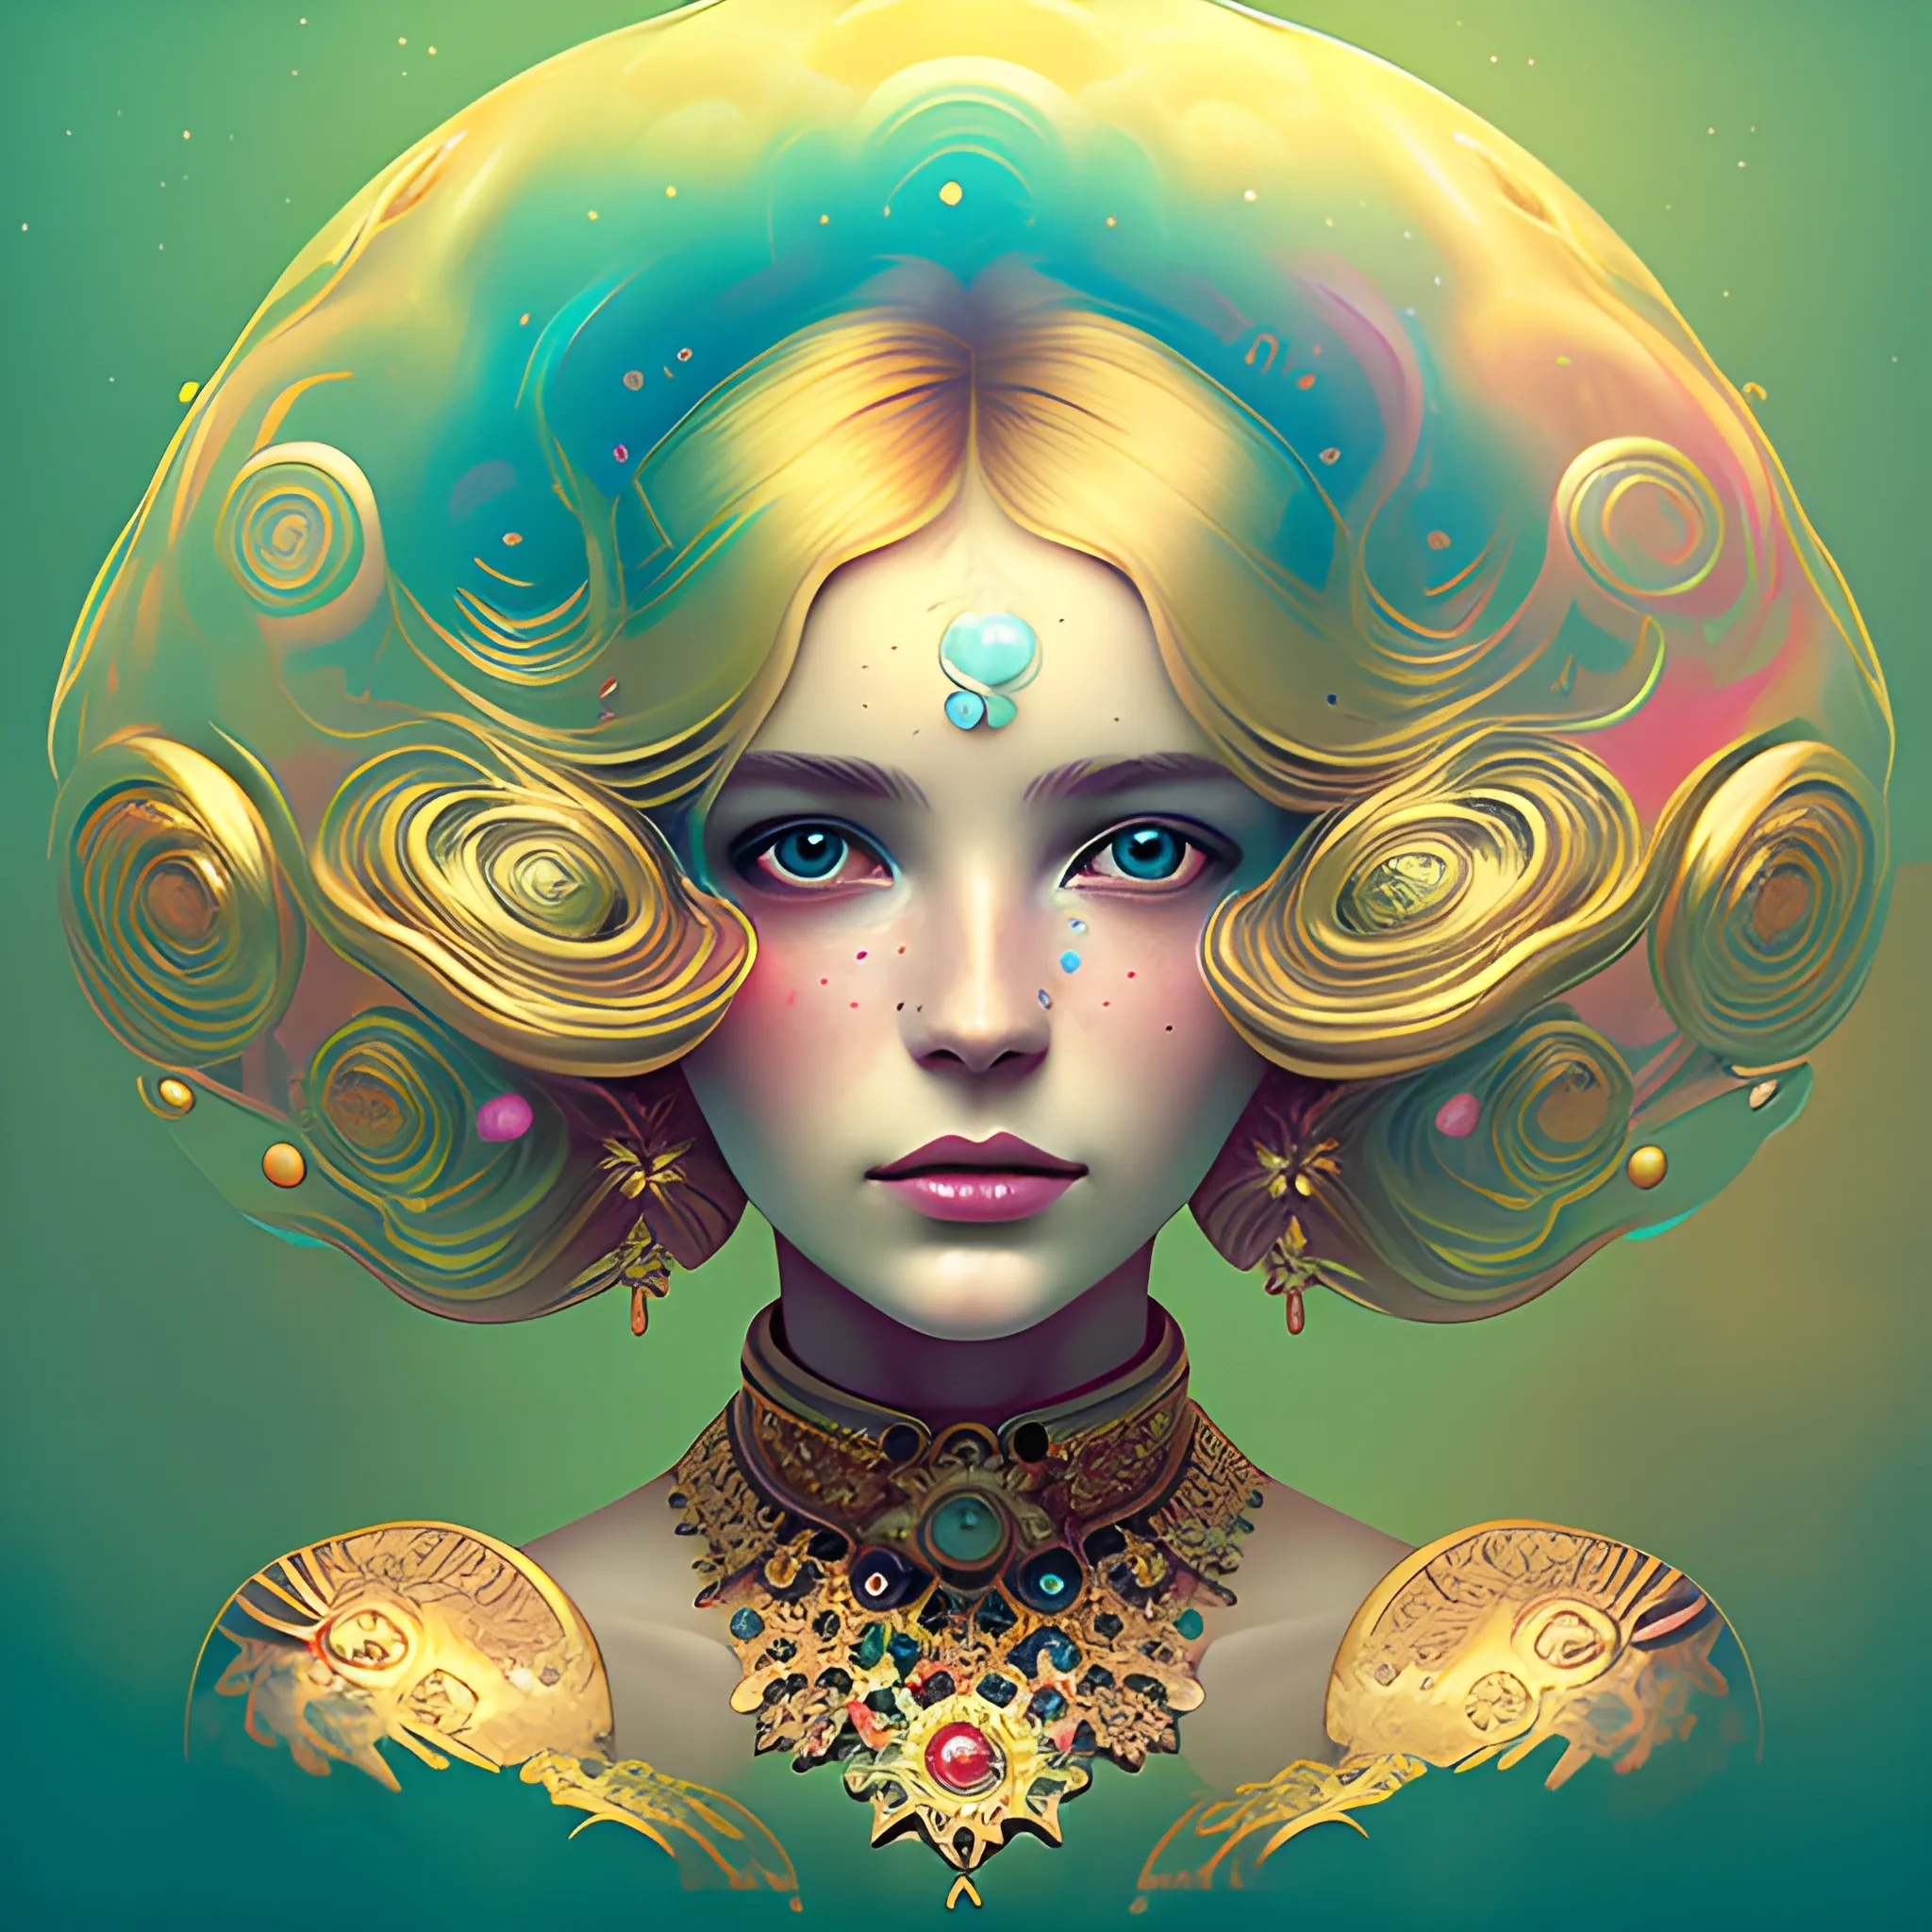 Flowery beautiful face blonde maiden with gold jewellery, by petros afshar, ross tran, Tom Bagshaw, tom whalen, underwater bubbly psychedelic clouds, Anaglyph 3D lens blur effect